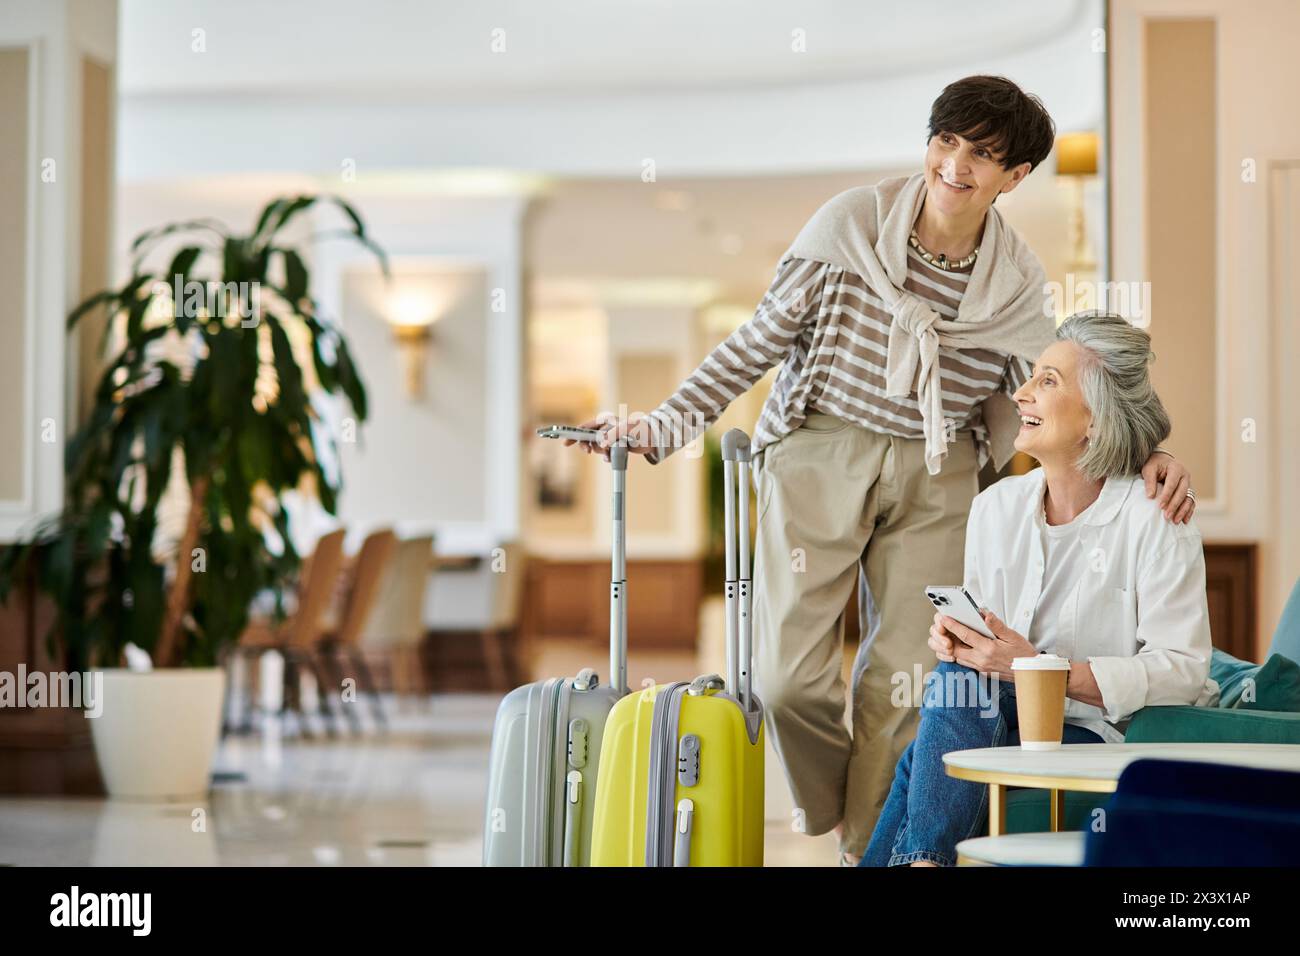 A senior lesbian couple, one standing, one with a suitcase, in a sweet moment. Stock Photo